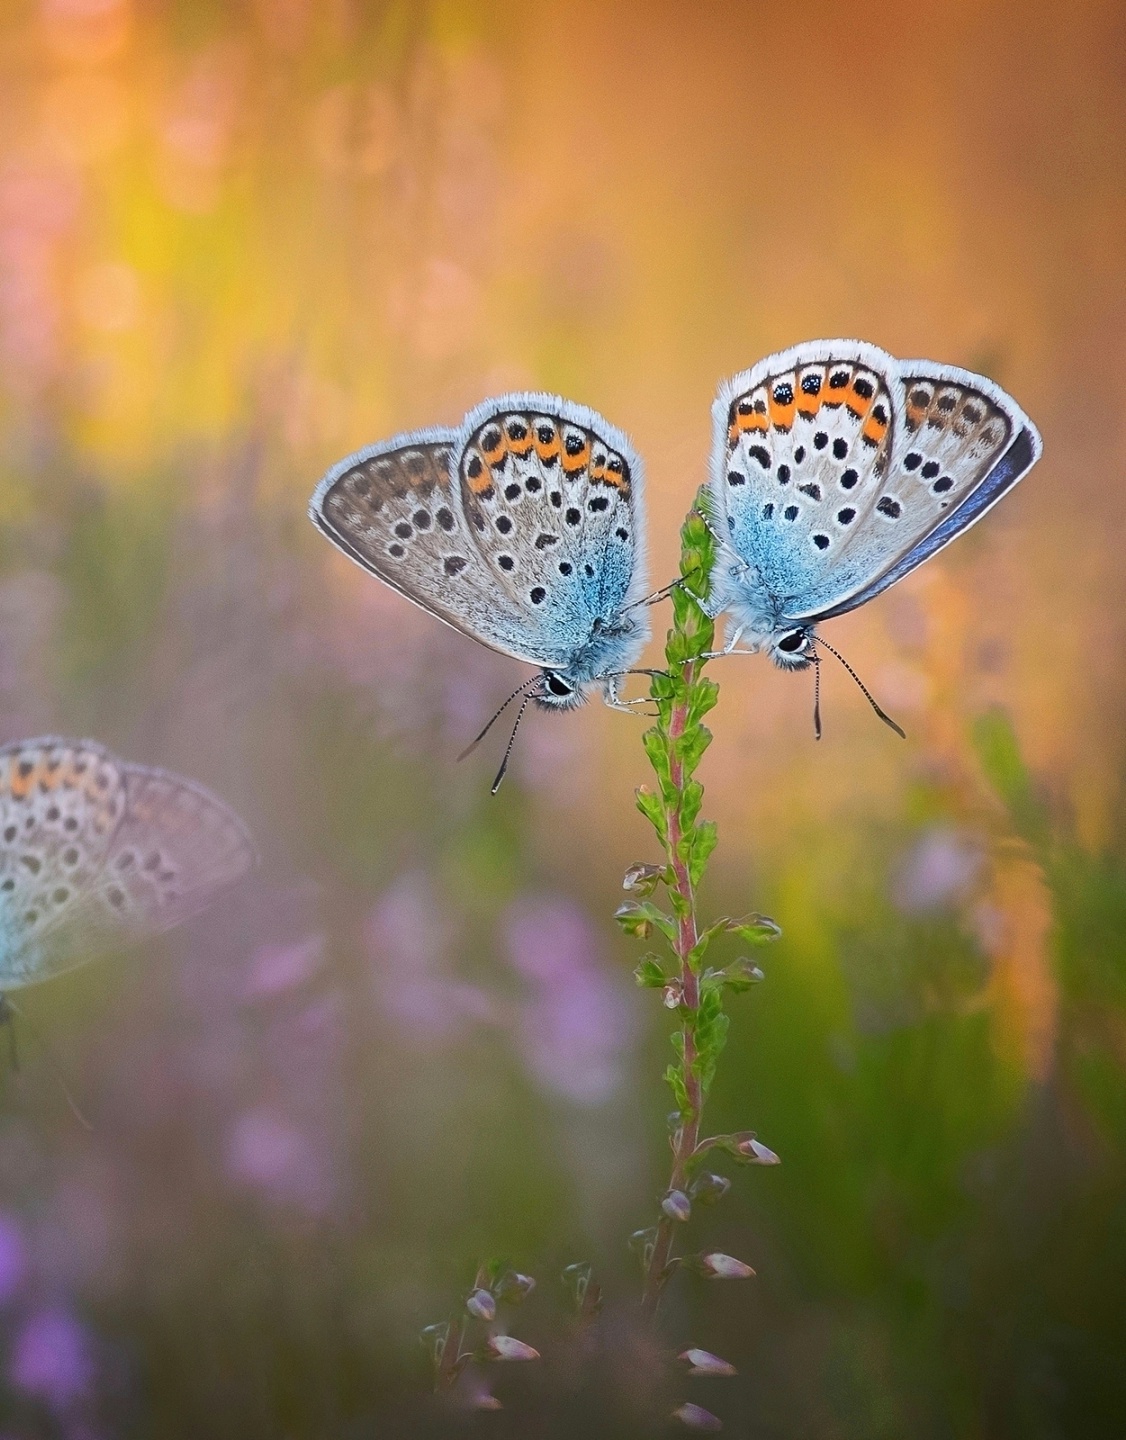 Butterfly Nature Wallpaper Image HD Download 